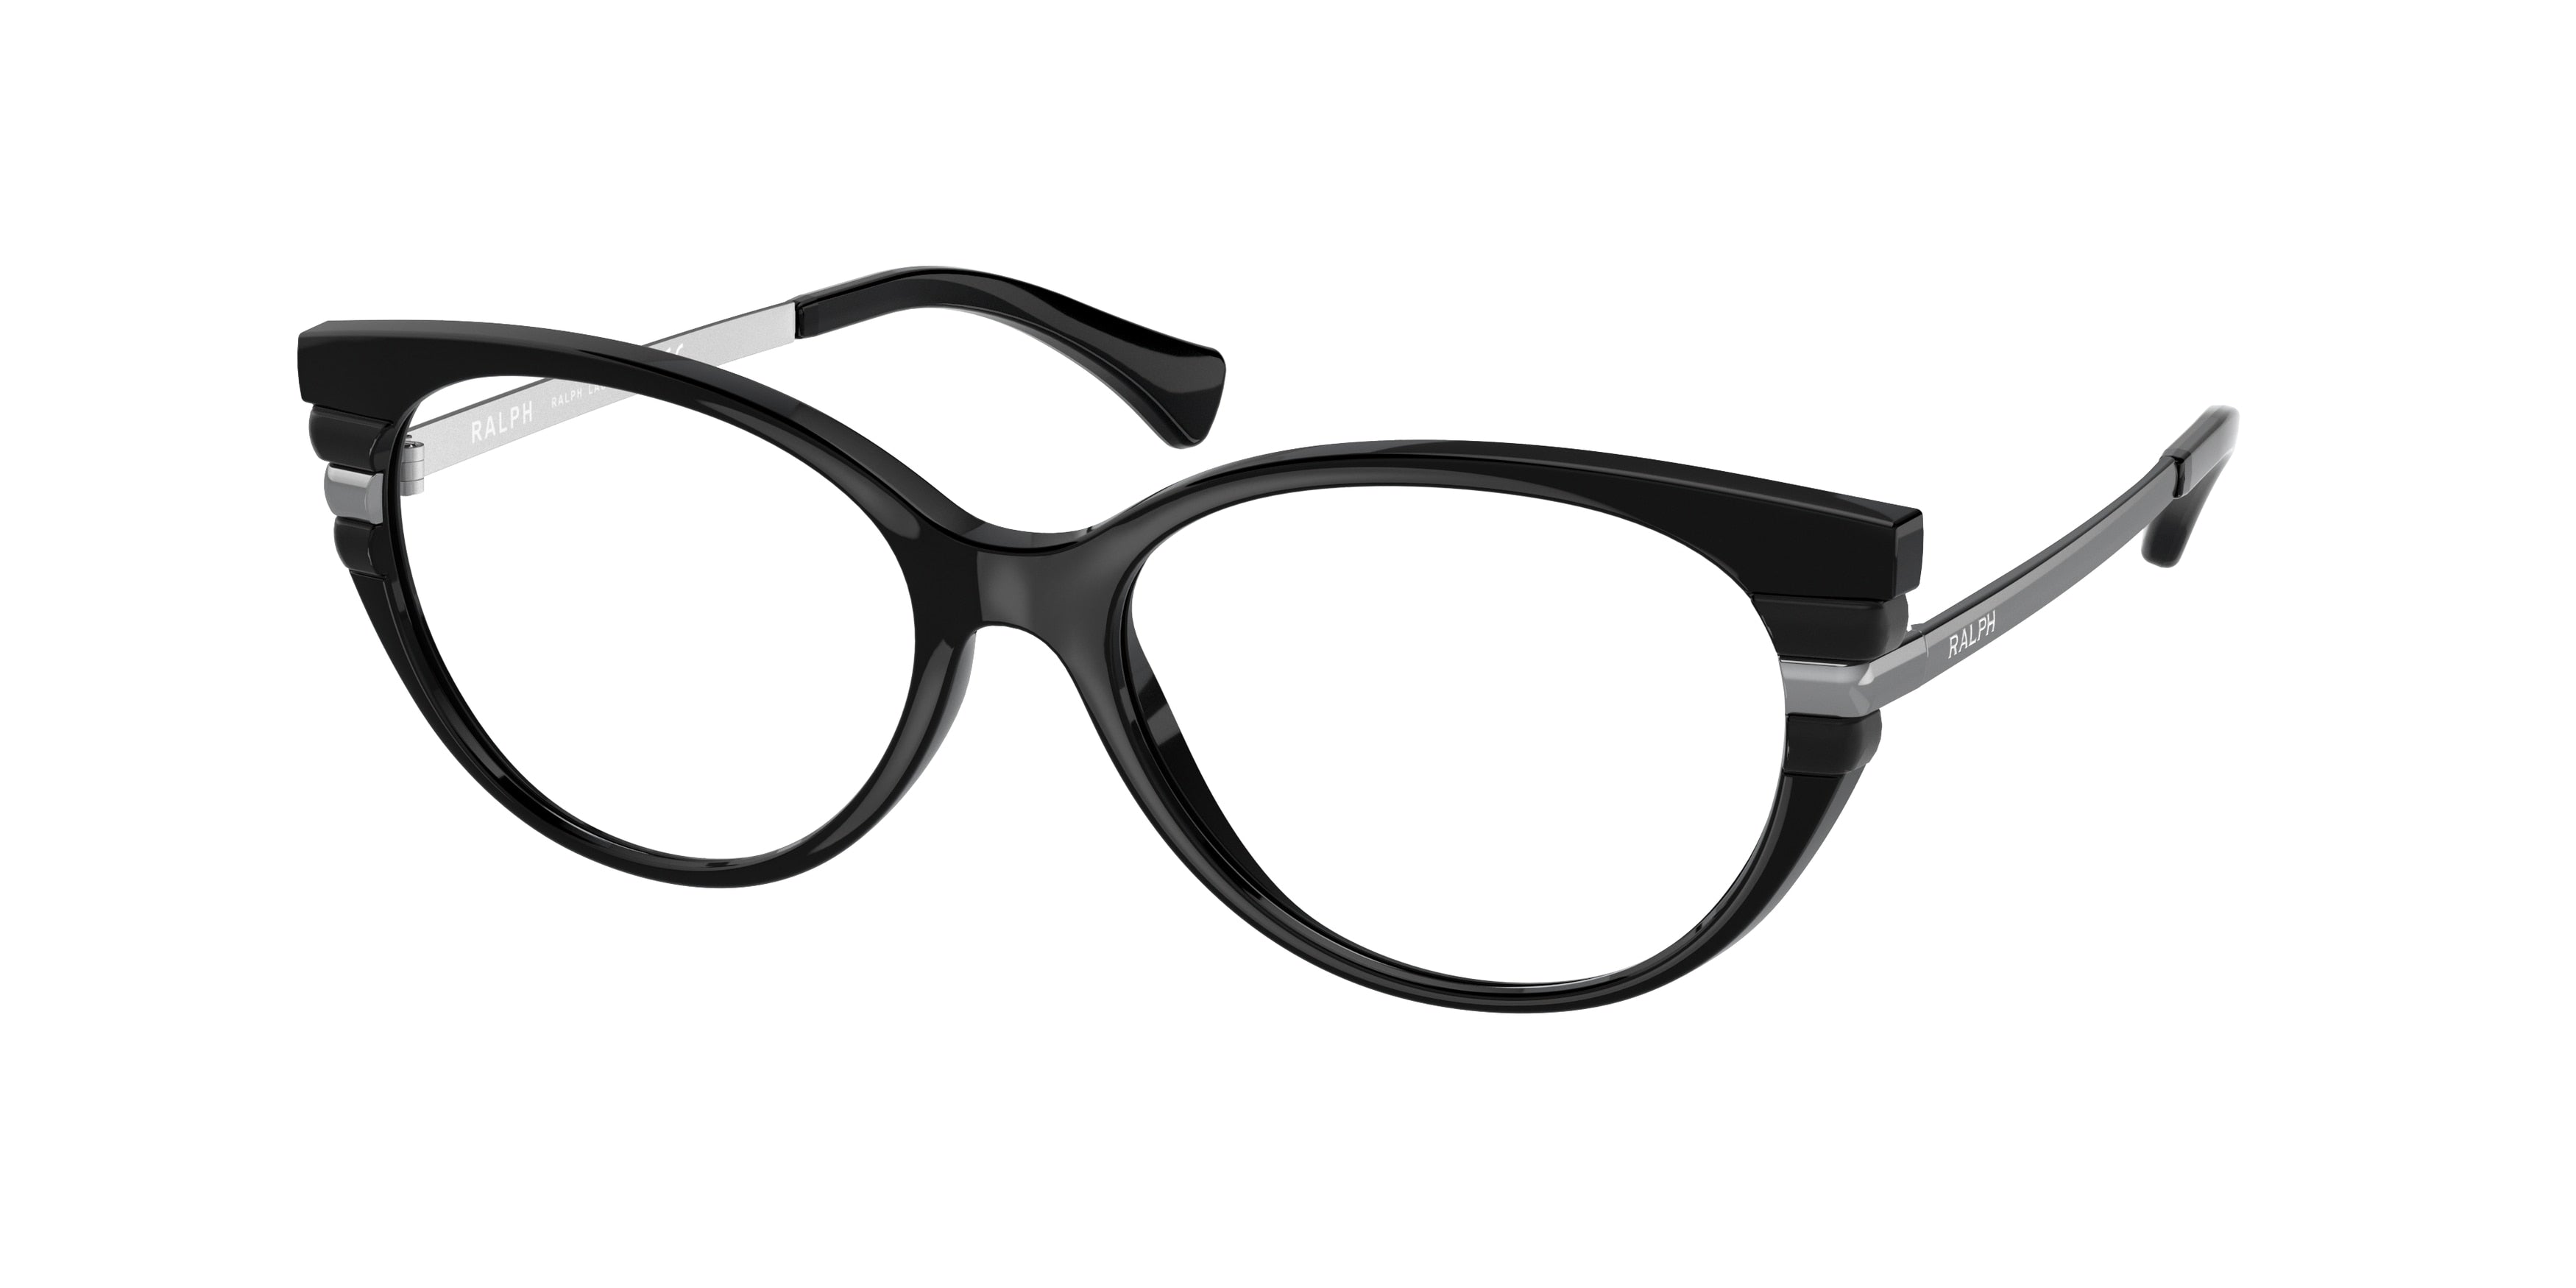 Ralph RA7127 Butterfly Eyeglasses  5001-Shiny Black With Grey Details 54-140-16 - Color Map Black